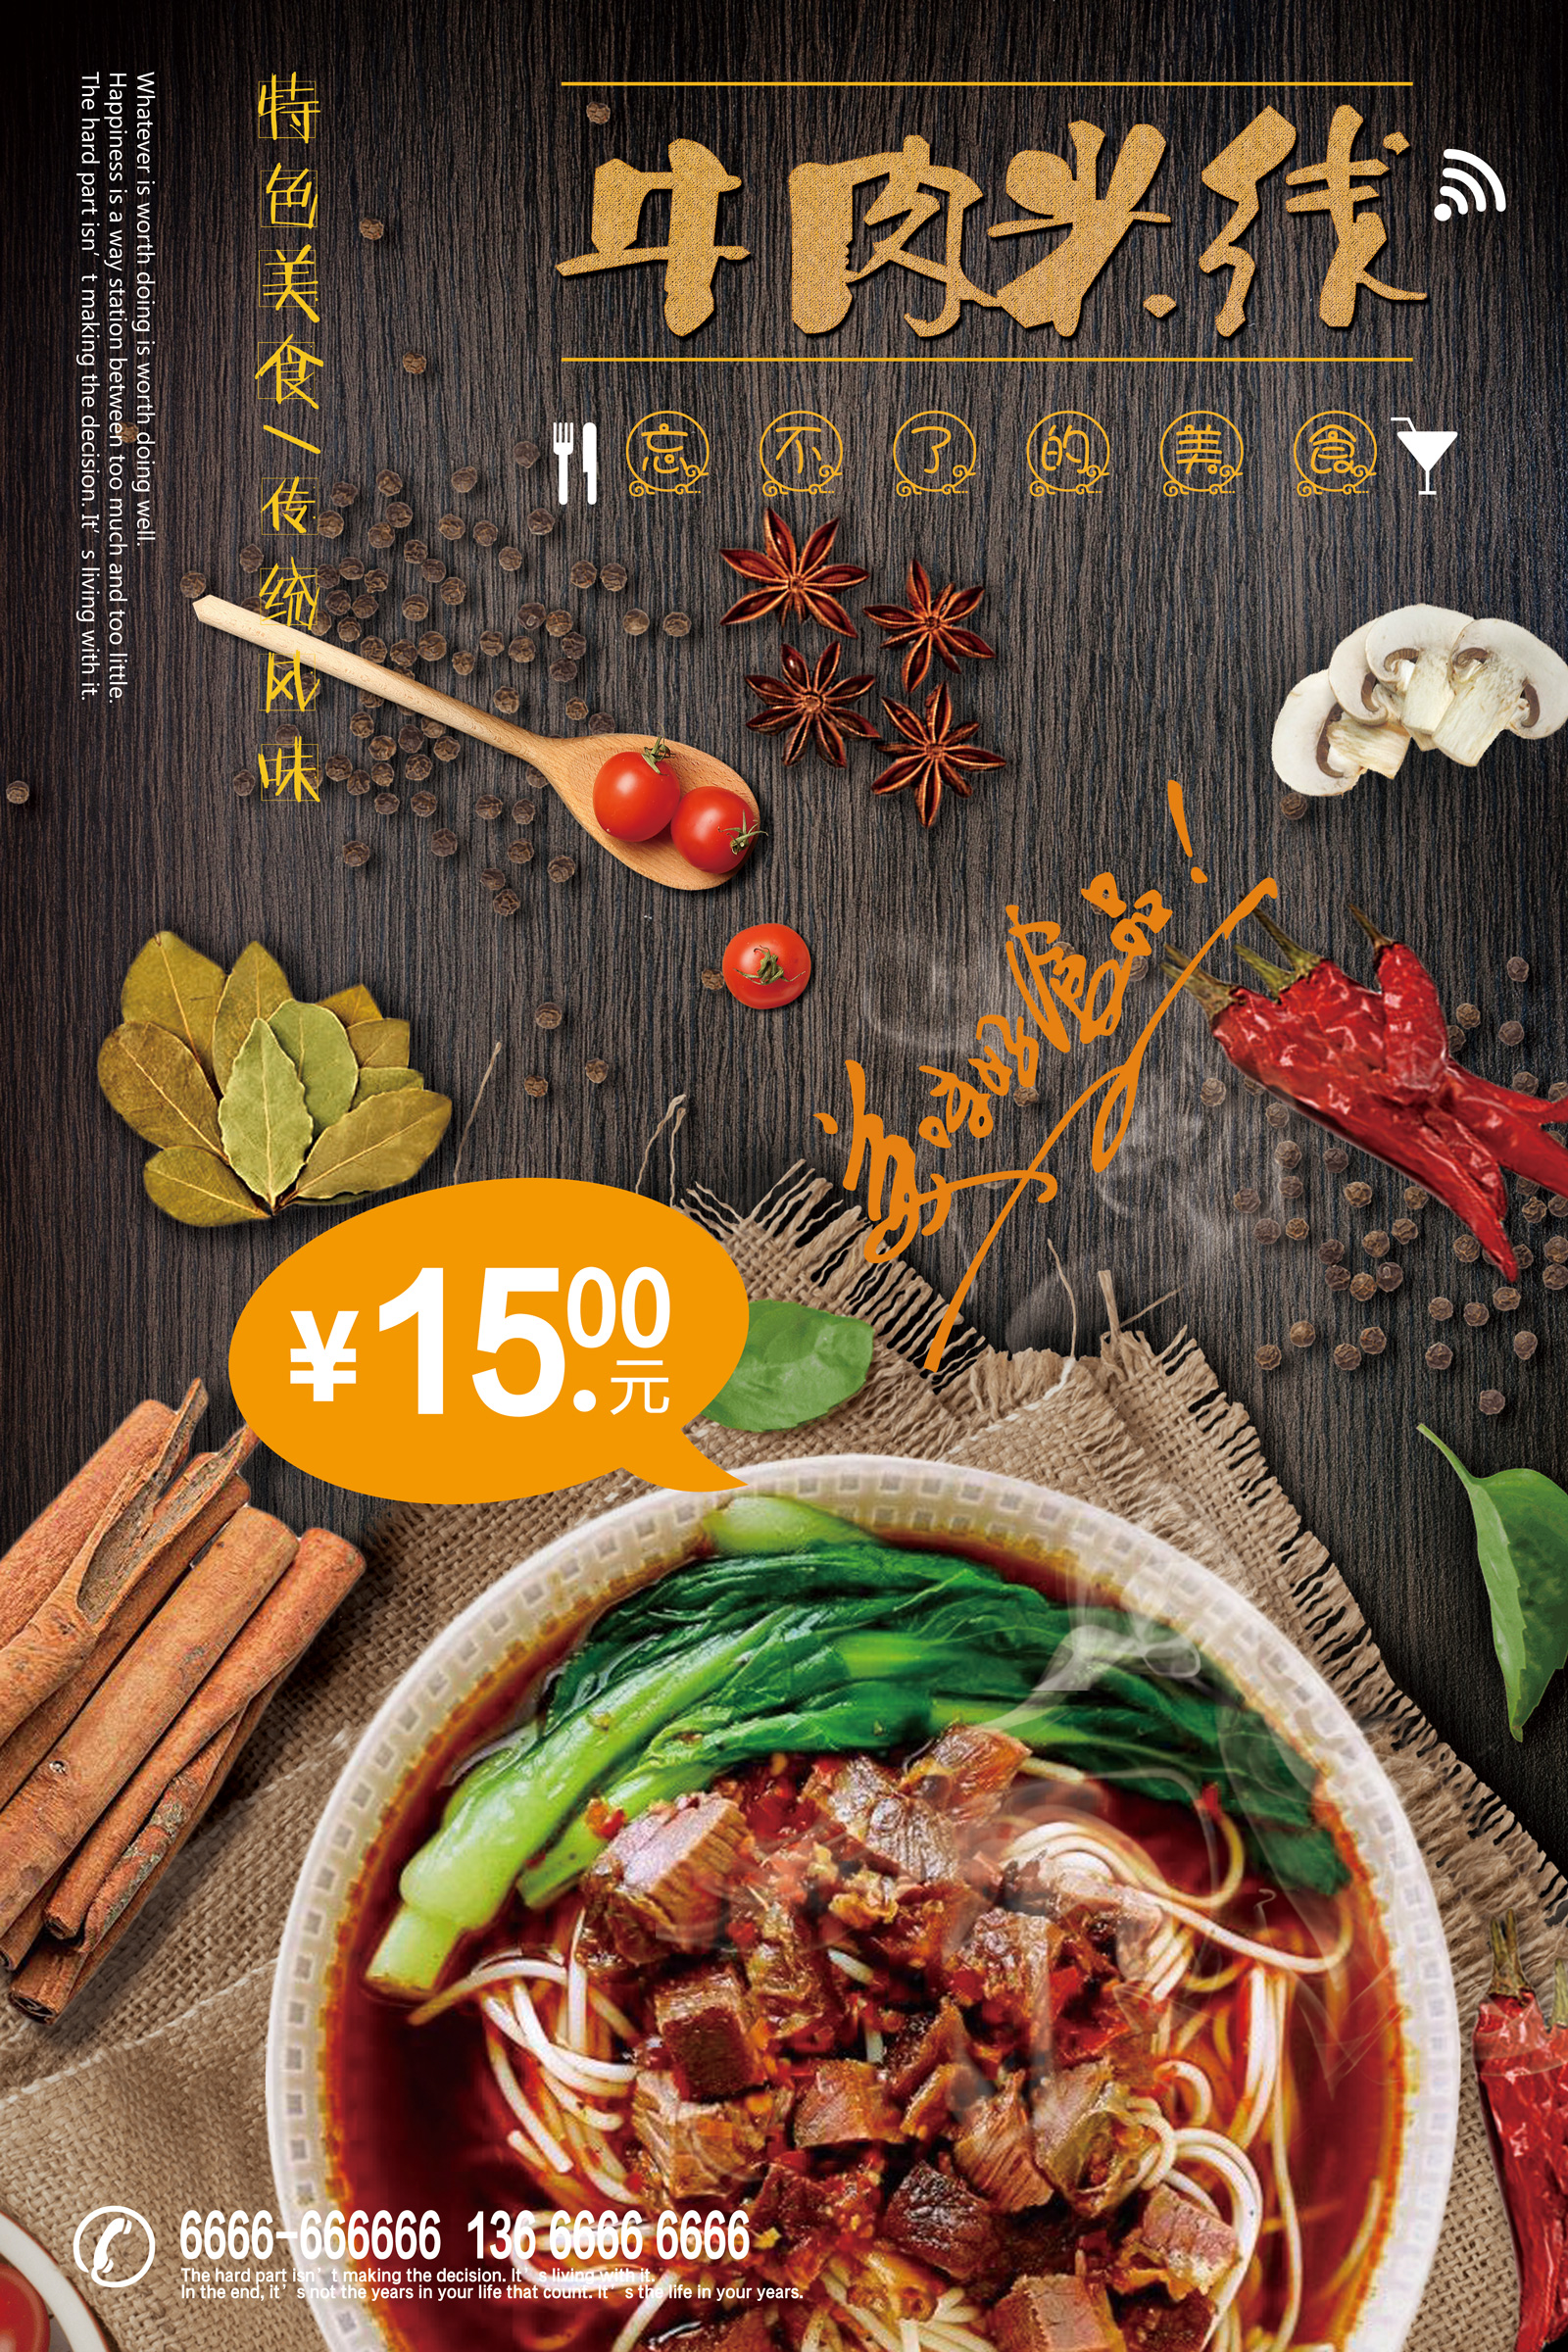 Beef Beige Poster Food Poster Showcase Food & Beverage China PSD File Free Download